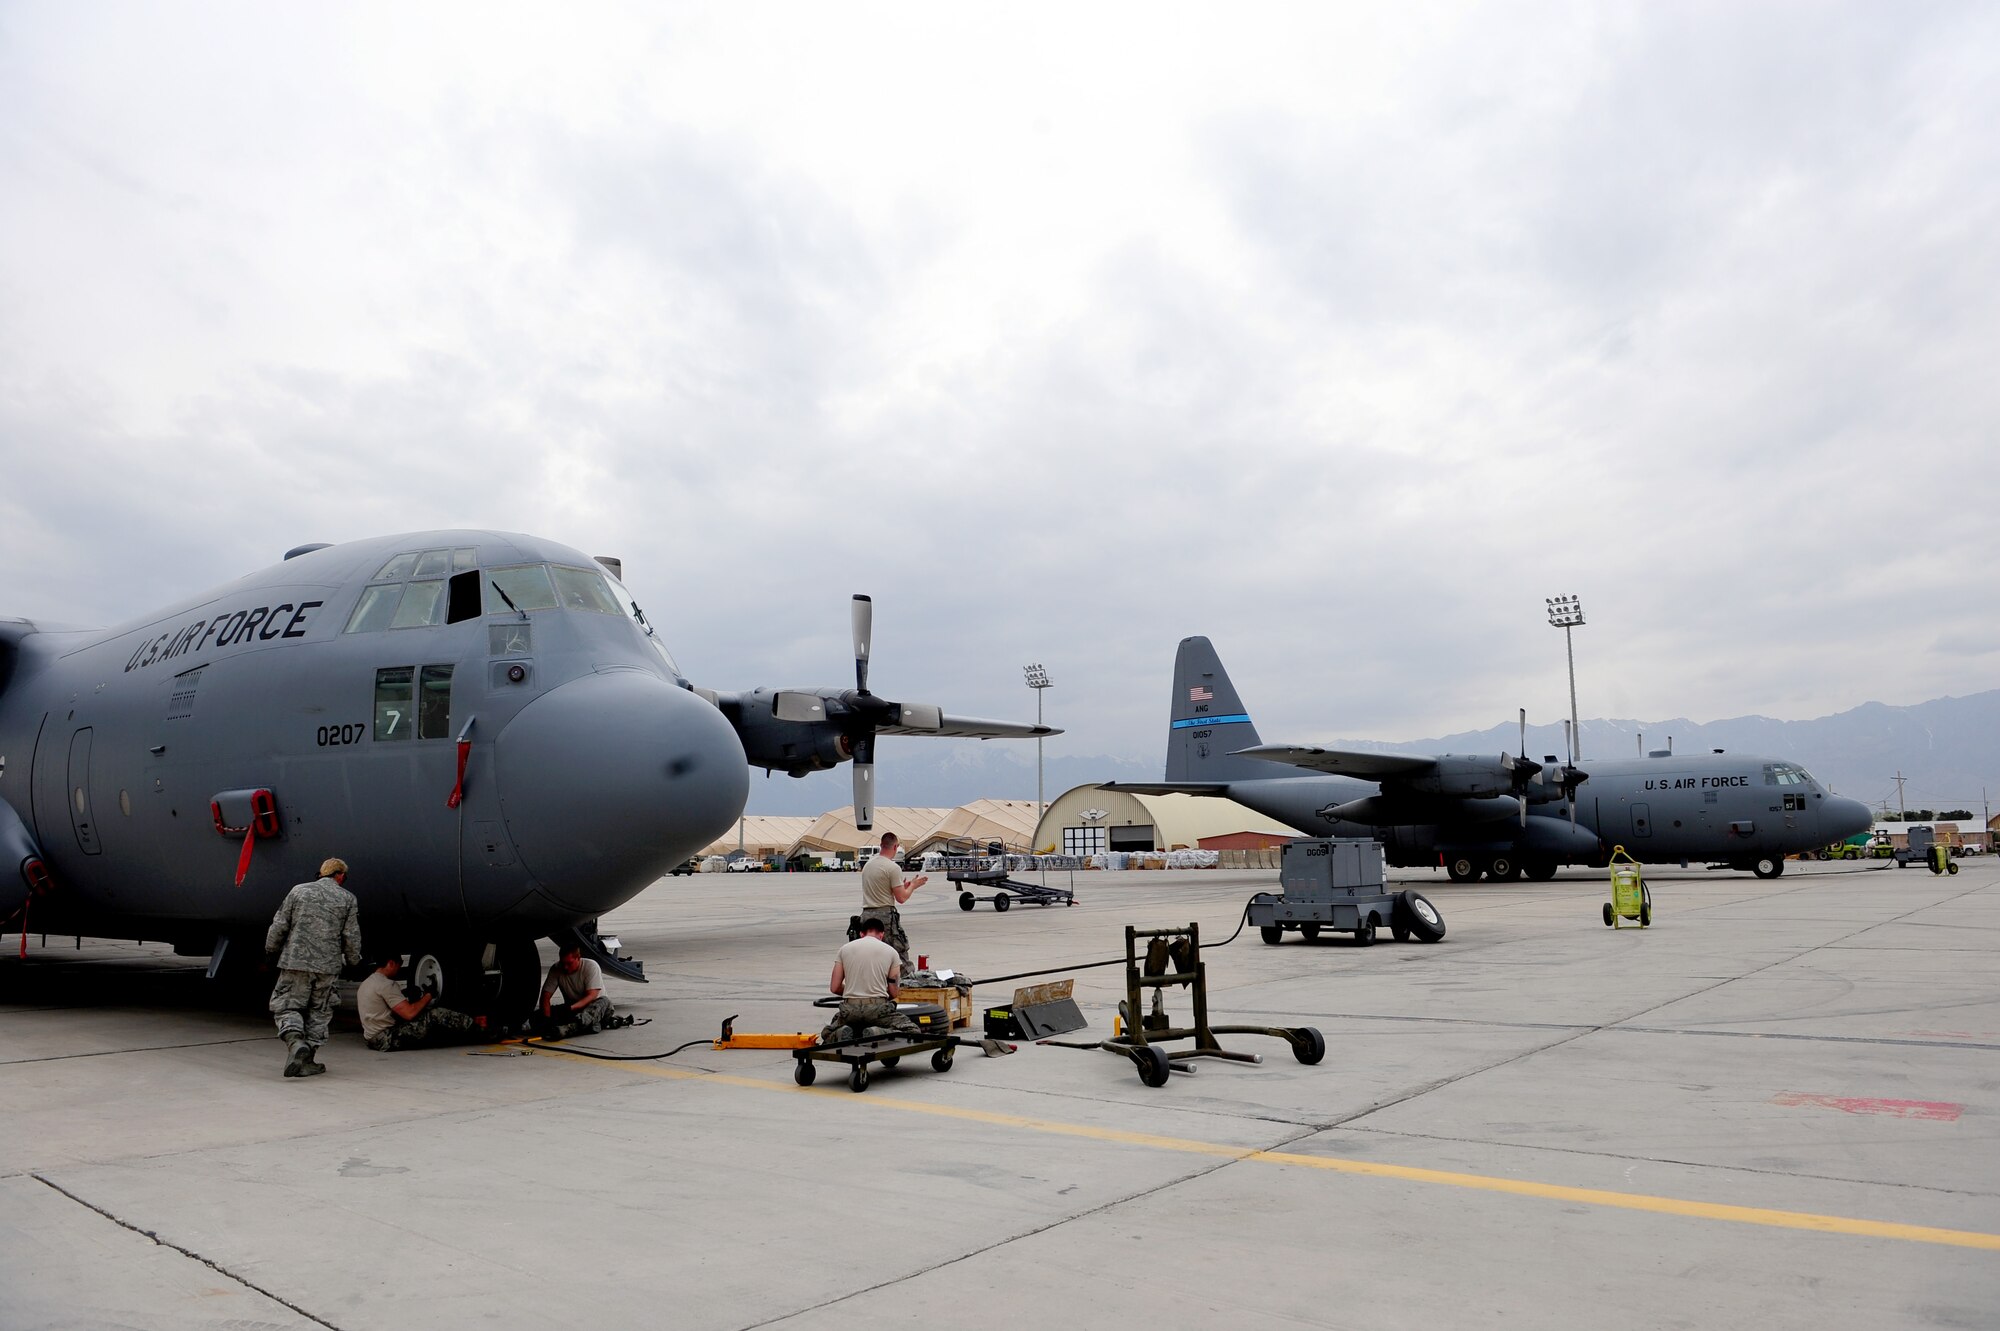 U.S. Air Force crew chiefs, from the 455th Expeditionary Aircraft Maintenance Squadron, change out the front tires on a C-130 Hercules aircraft at Bagram Airfield, Afghanistan, April 9, 2011.  The Airmen are deployed from the Delaware Air National Guard’s 166th Aircraft Maintenance Squadron, New Castle, Del., supporting Operation Enduring Freedom. (U.S. Air Force photo/Master Sgt. William Greer)